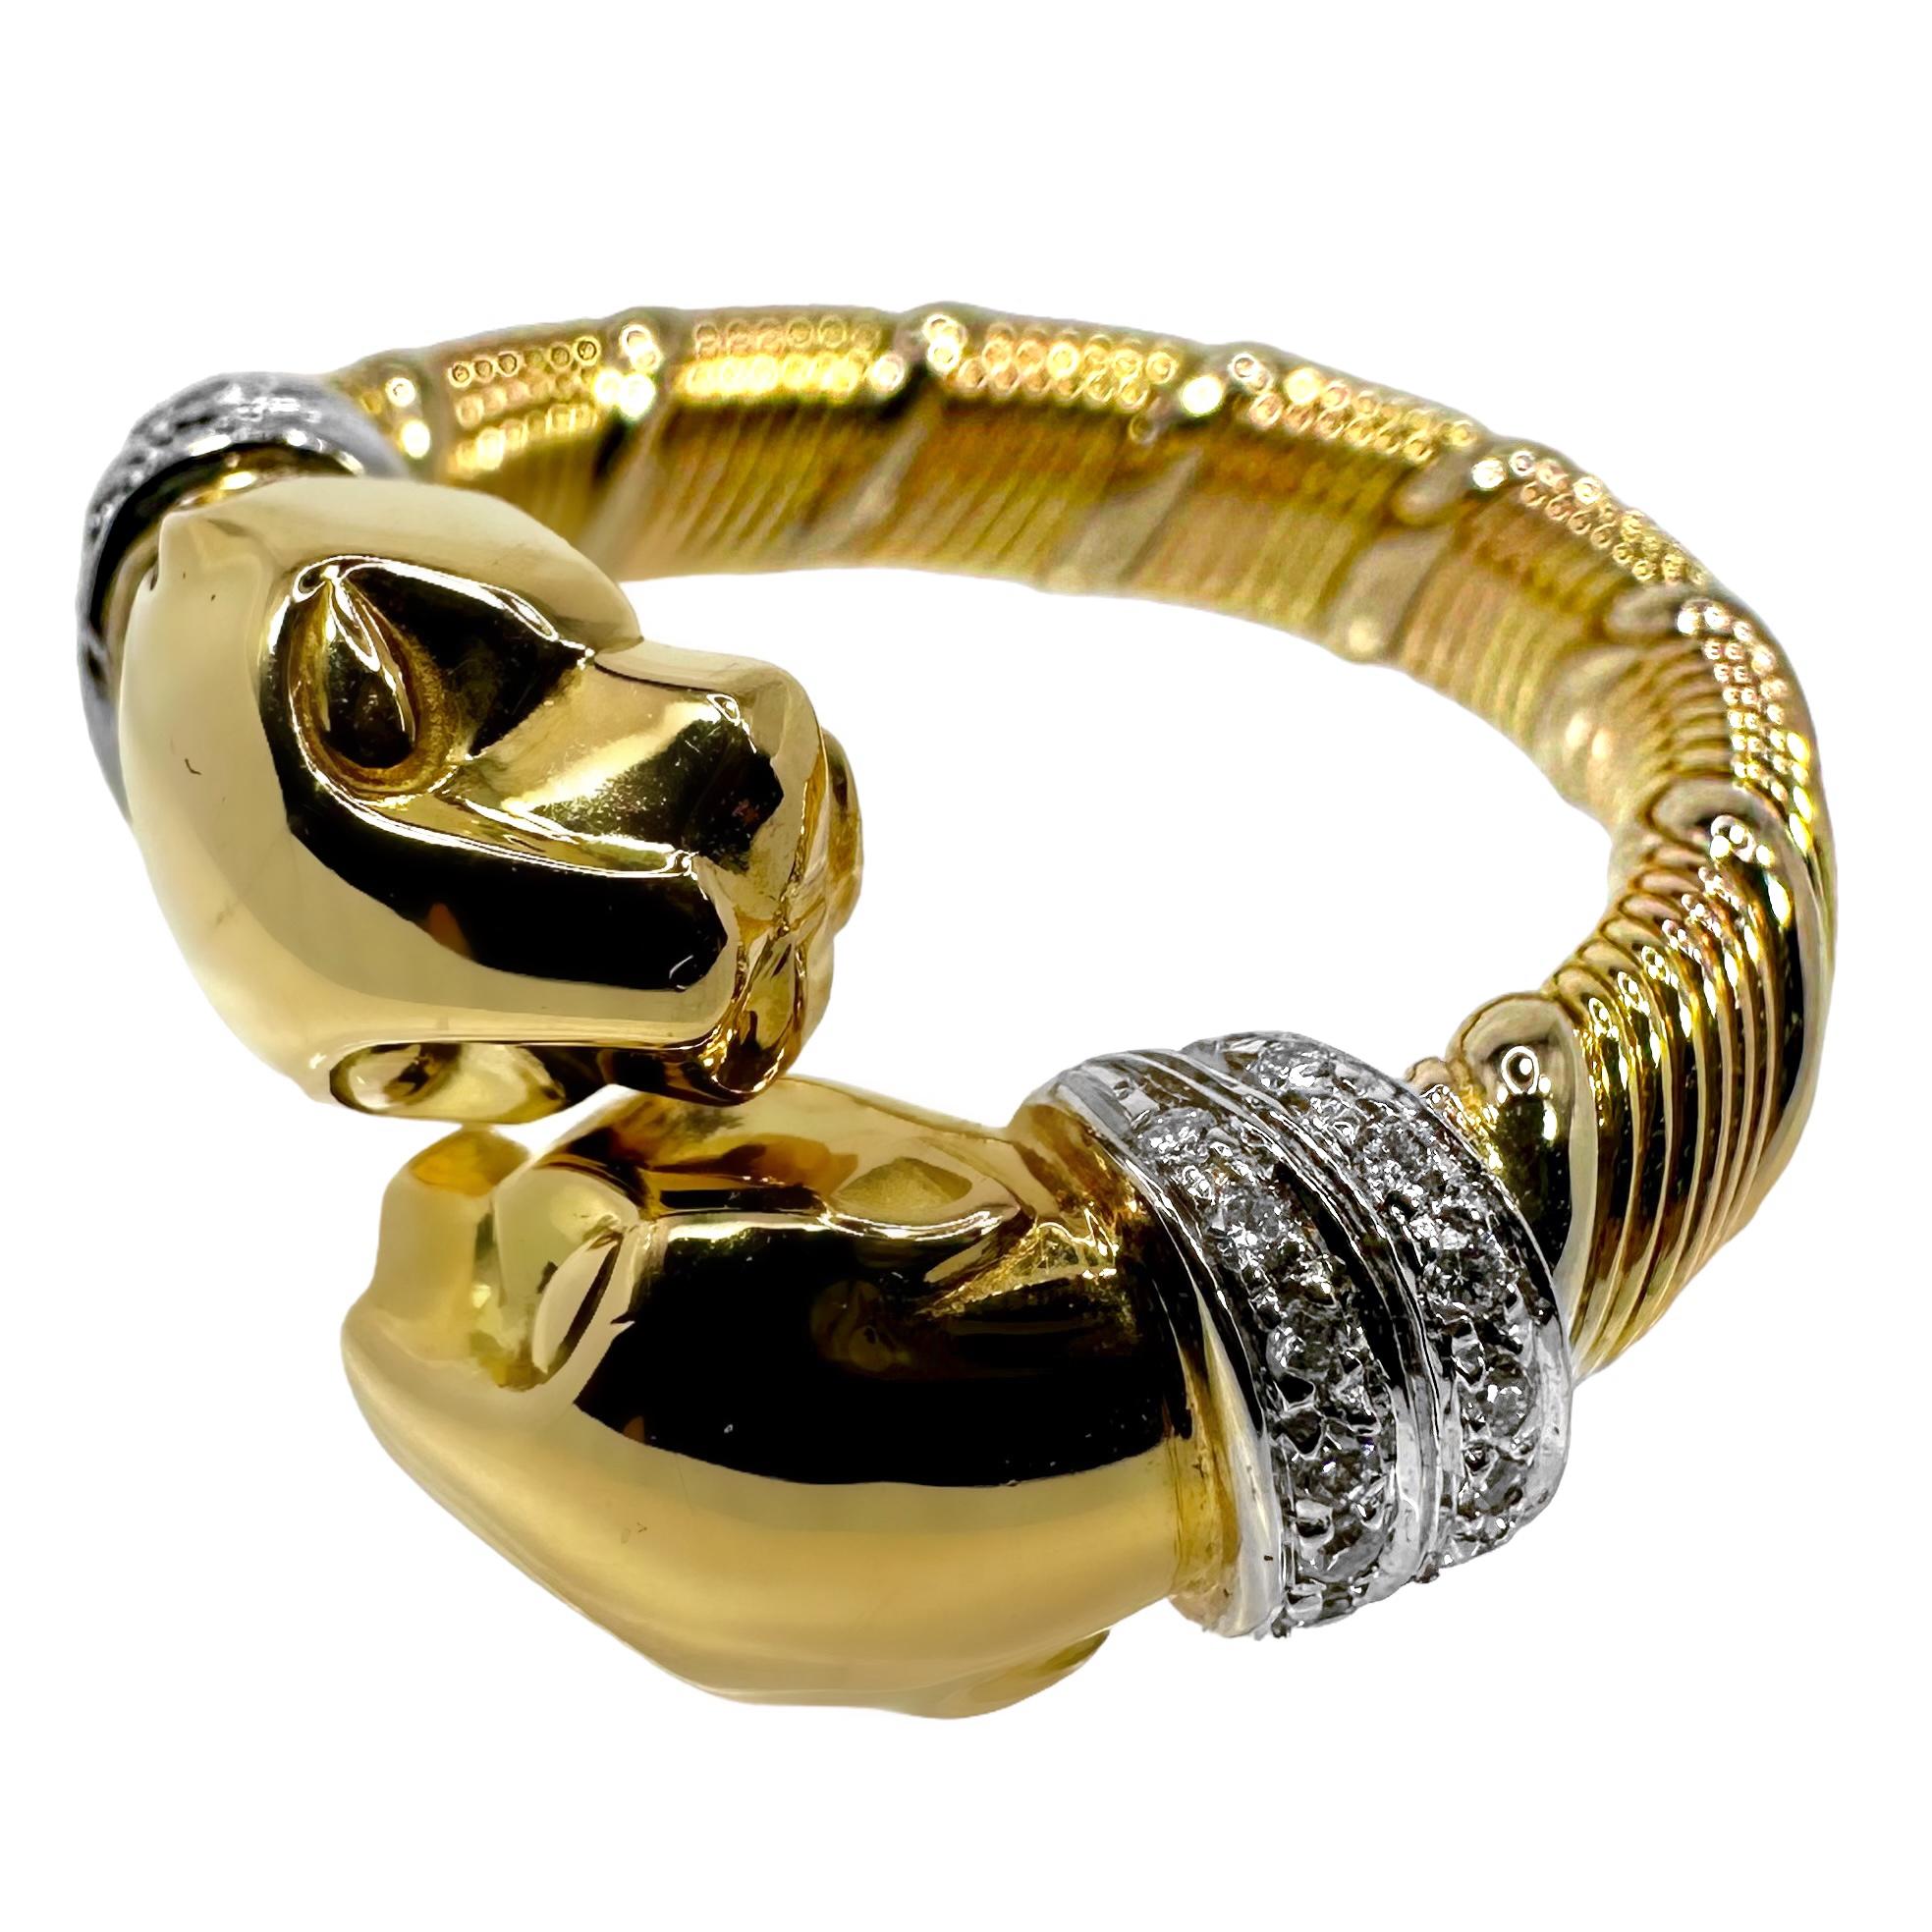 This striking and iconic Cartier ring crafted in 18k yellow gold and diamonds, is an elegant example of the venerated house's exquisite jewelry design and execution. Two panther heads bypass each other at the front and each wears a collar set with